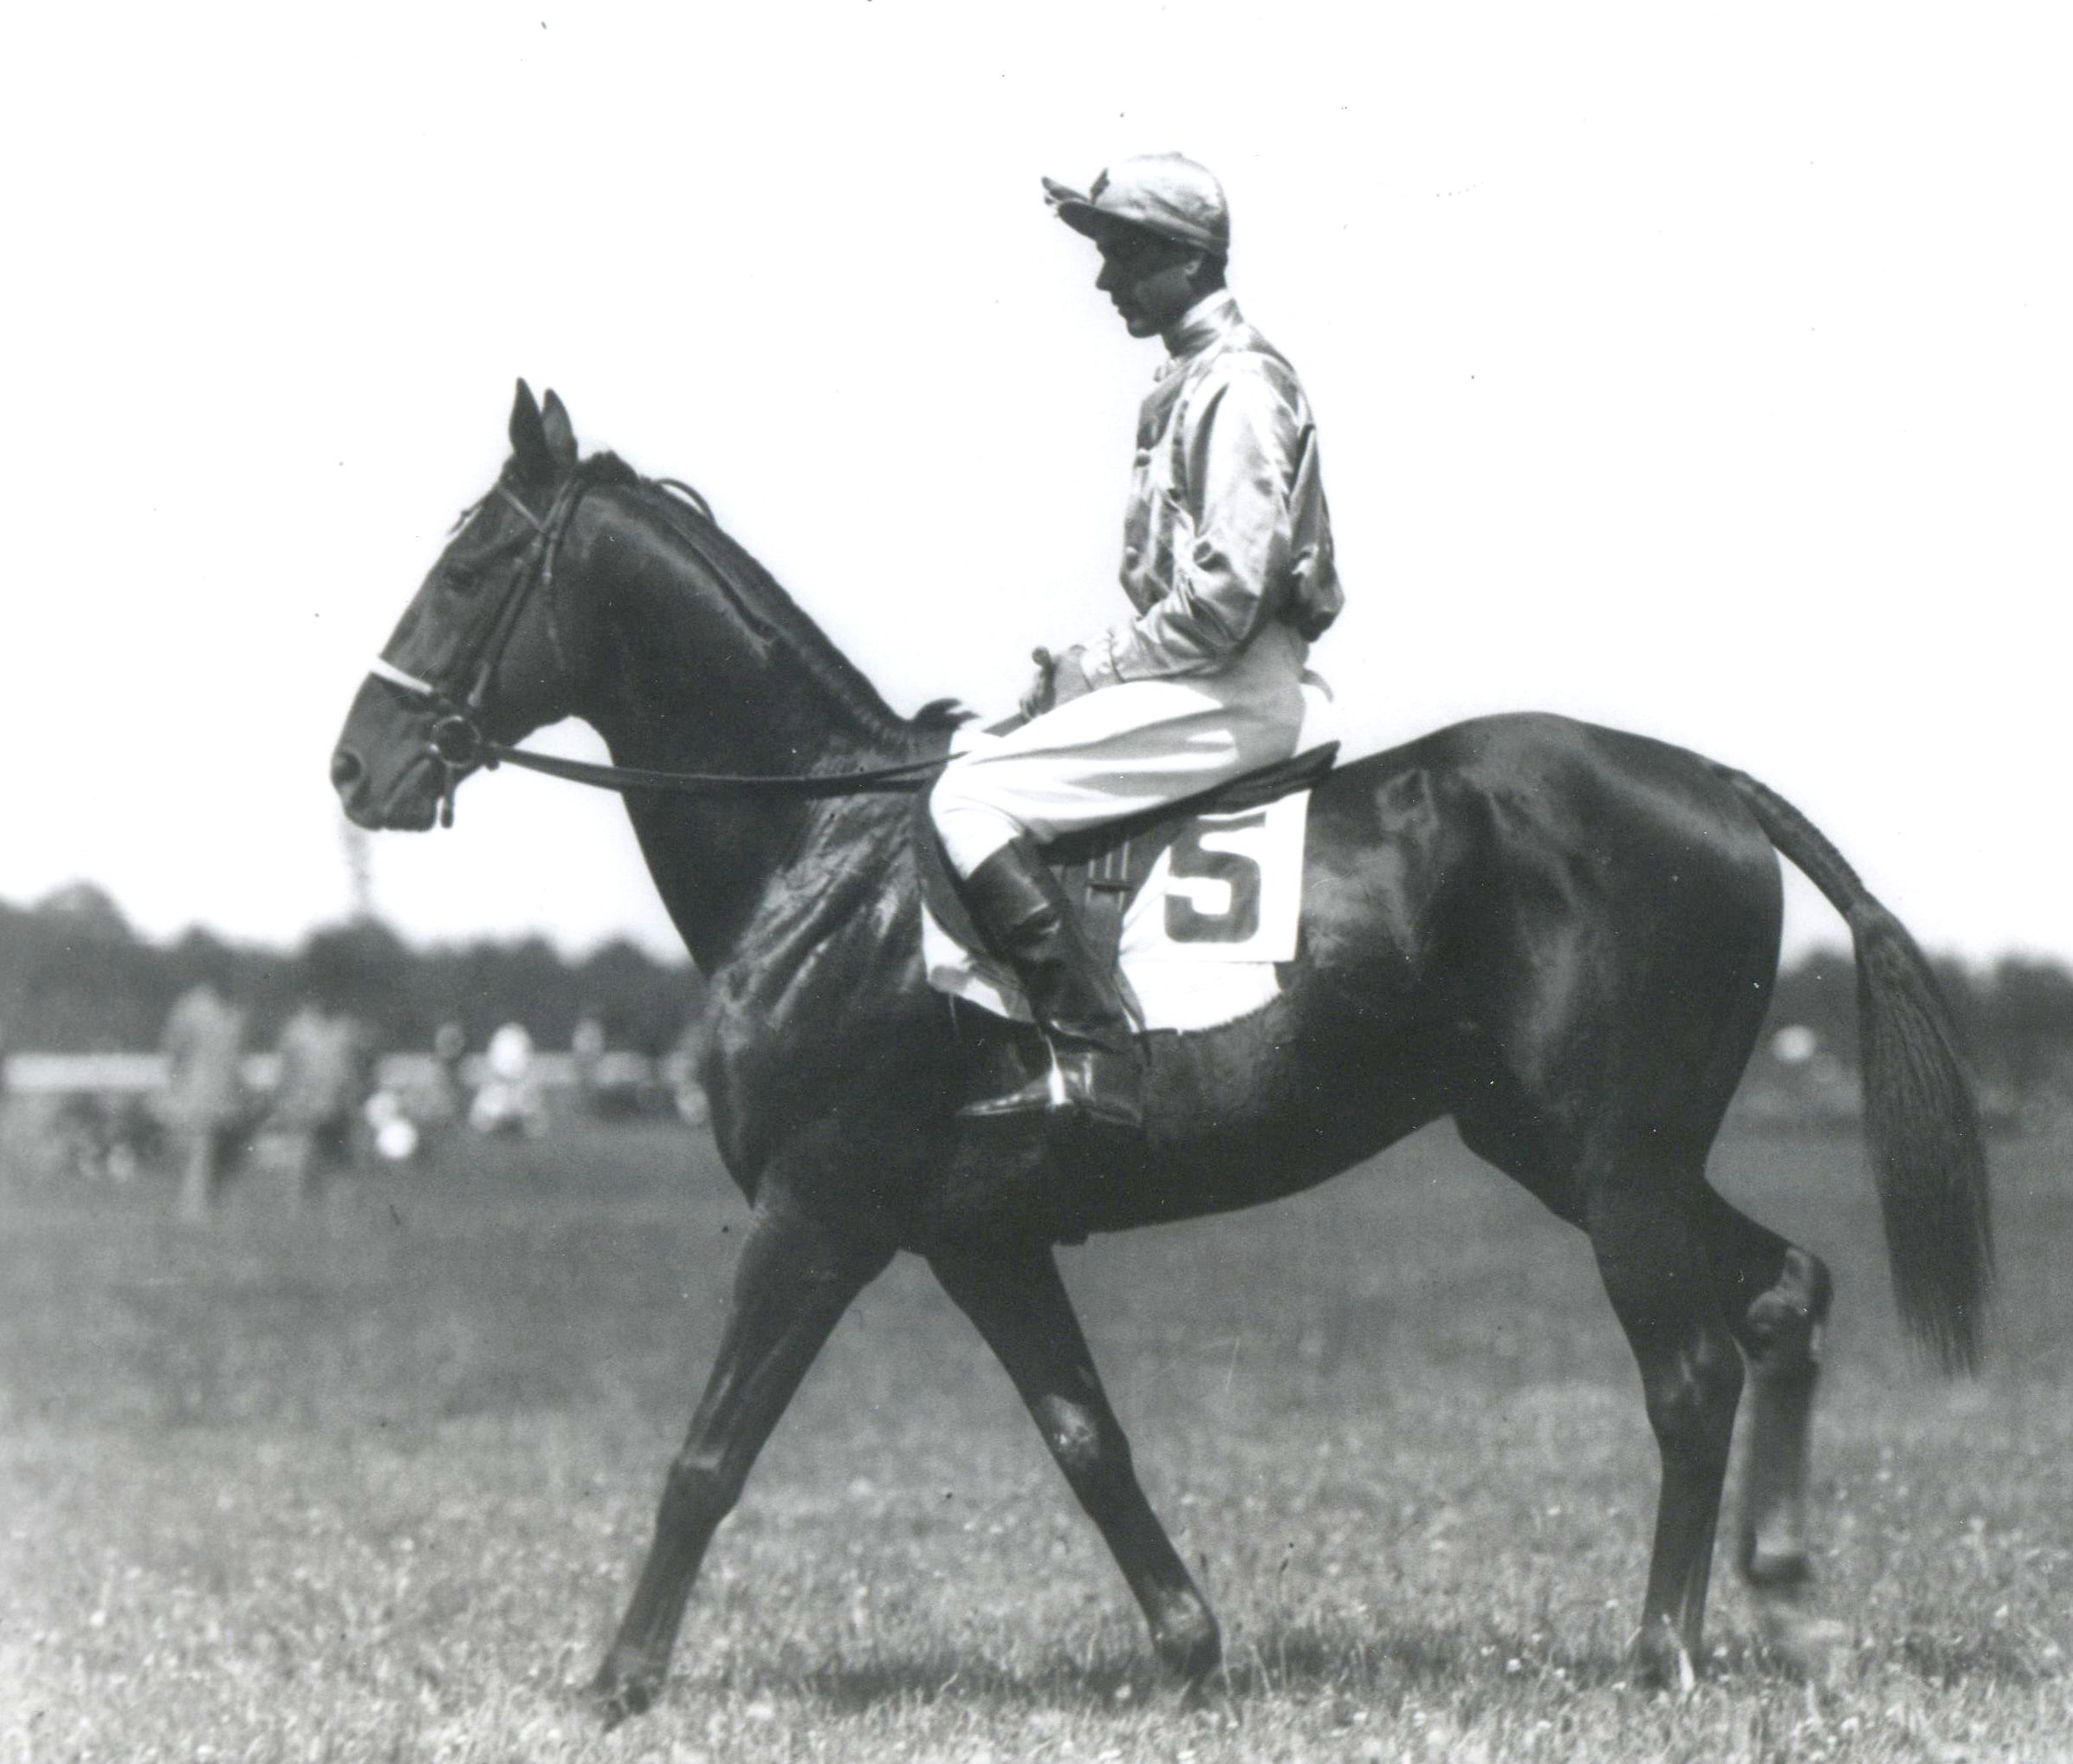 Battleship, son of Man o' War, with rider Carroll K. Bassett up (Keeneland Library Morgan Collection/Museum Collection)